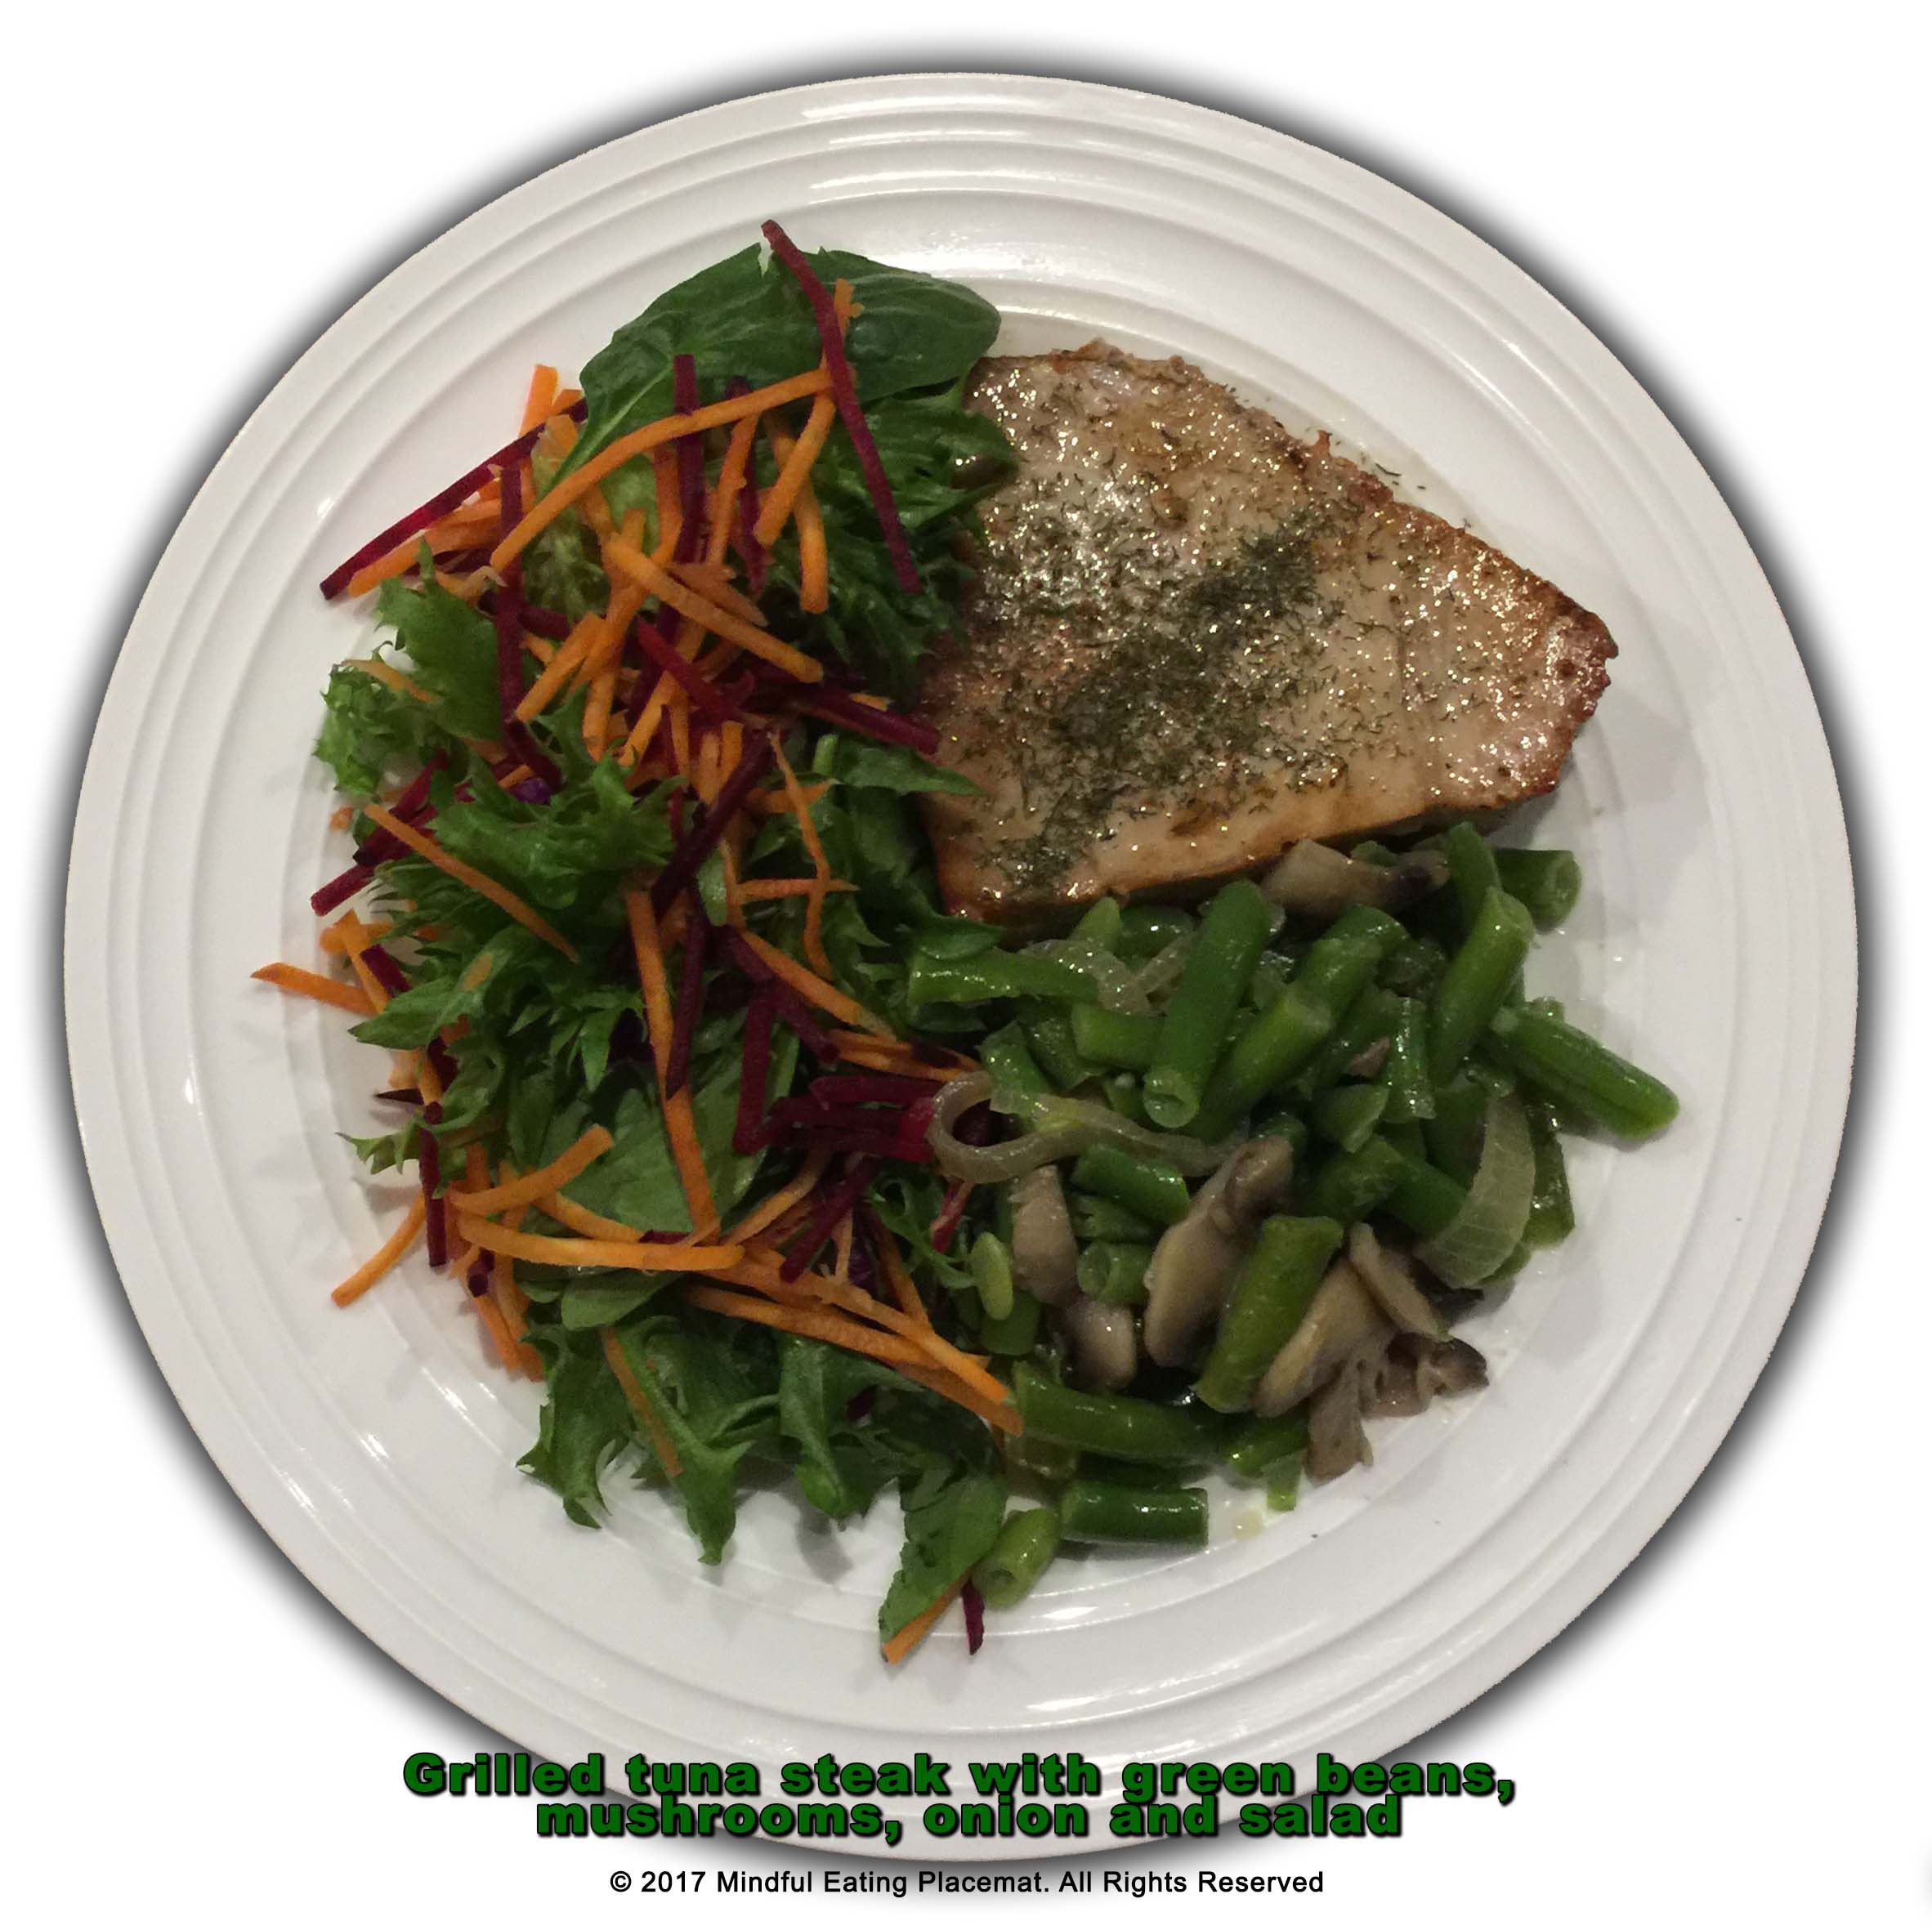 Grilled tuna steak with green beans, mushrooms and side salad